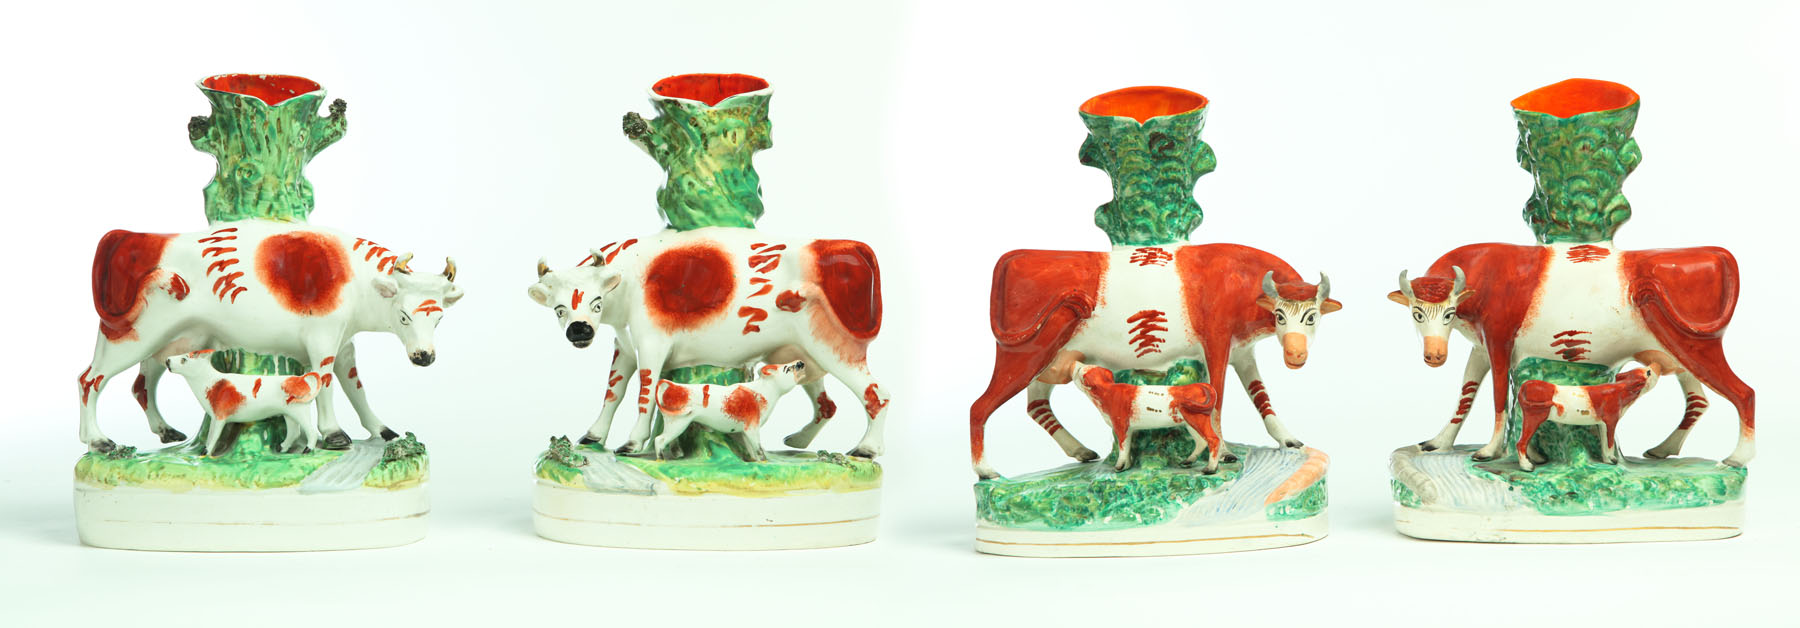 TWO PAIR OF STAFFORDSHIRE SPILL